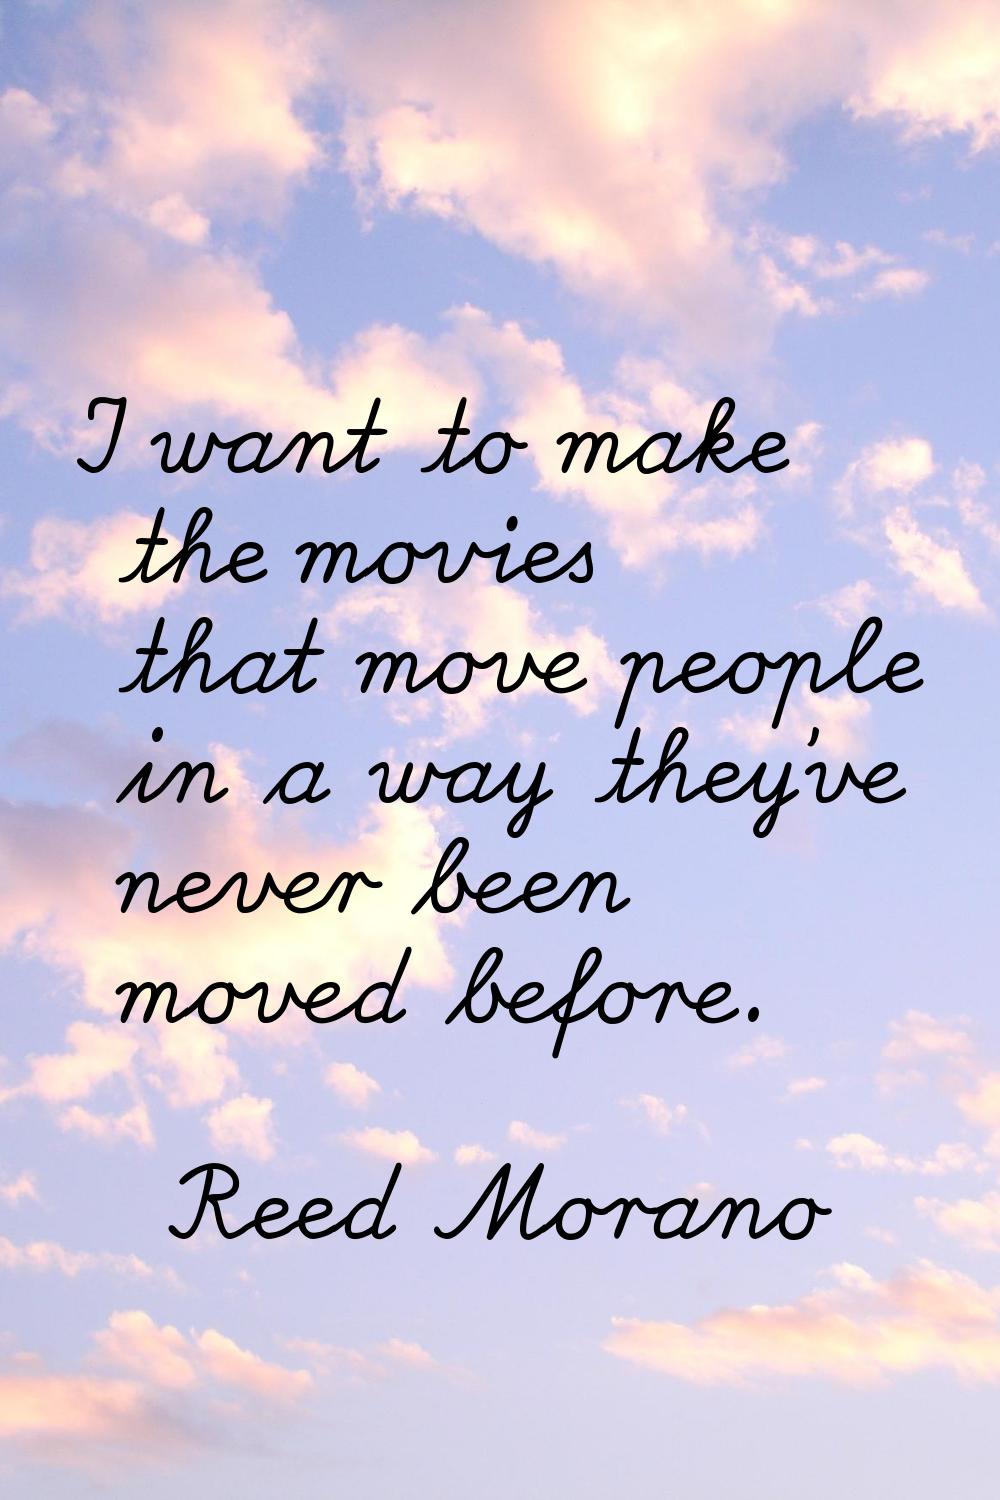 I want to make the movies that move people in a way they've never been moved before.